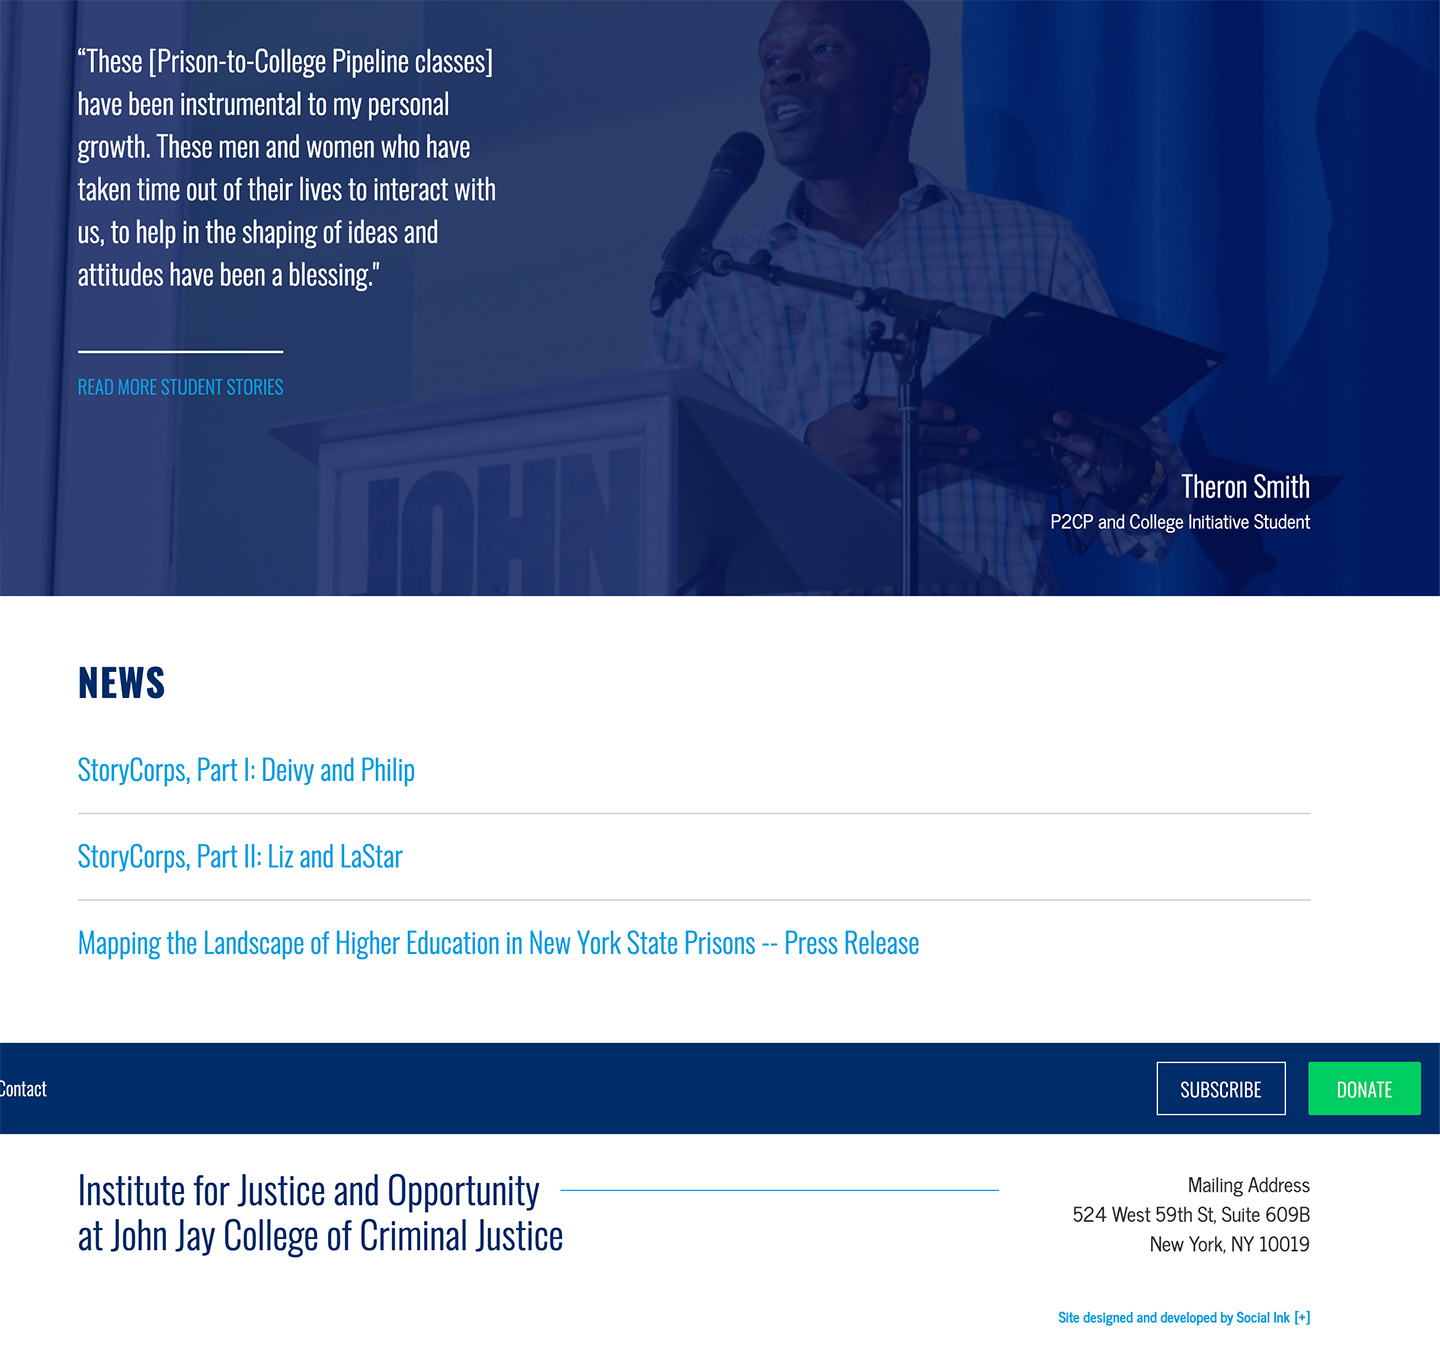 Institute for Justice and Opportunity (CUNY John Jay)